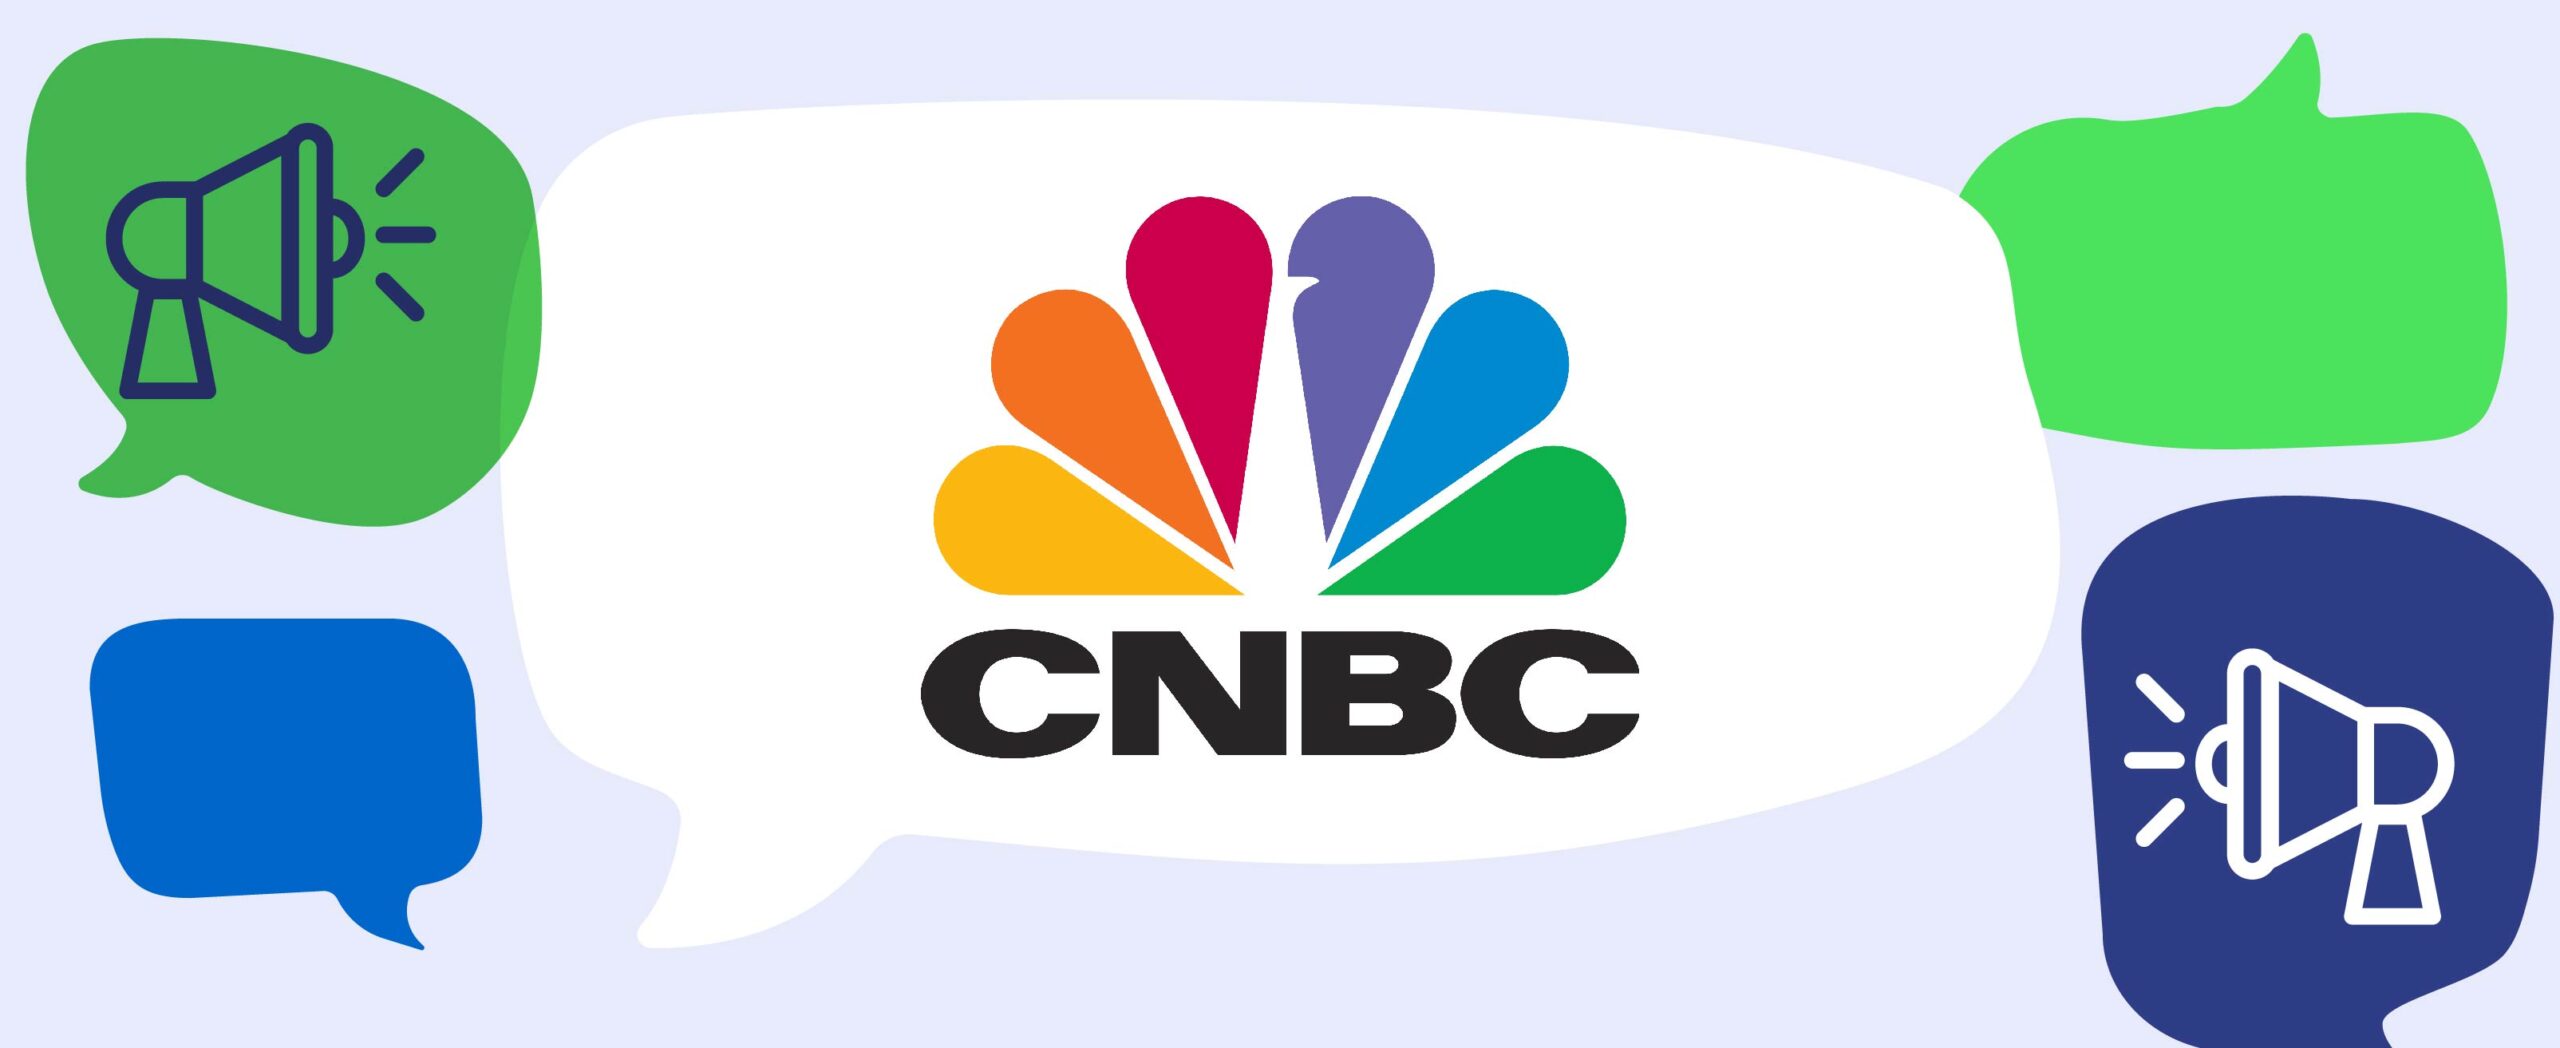 CNBC logo in speech bubble with various green and blue speech bubbles and media icons.